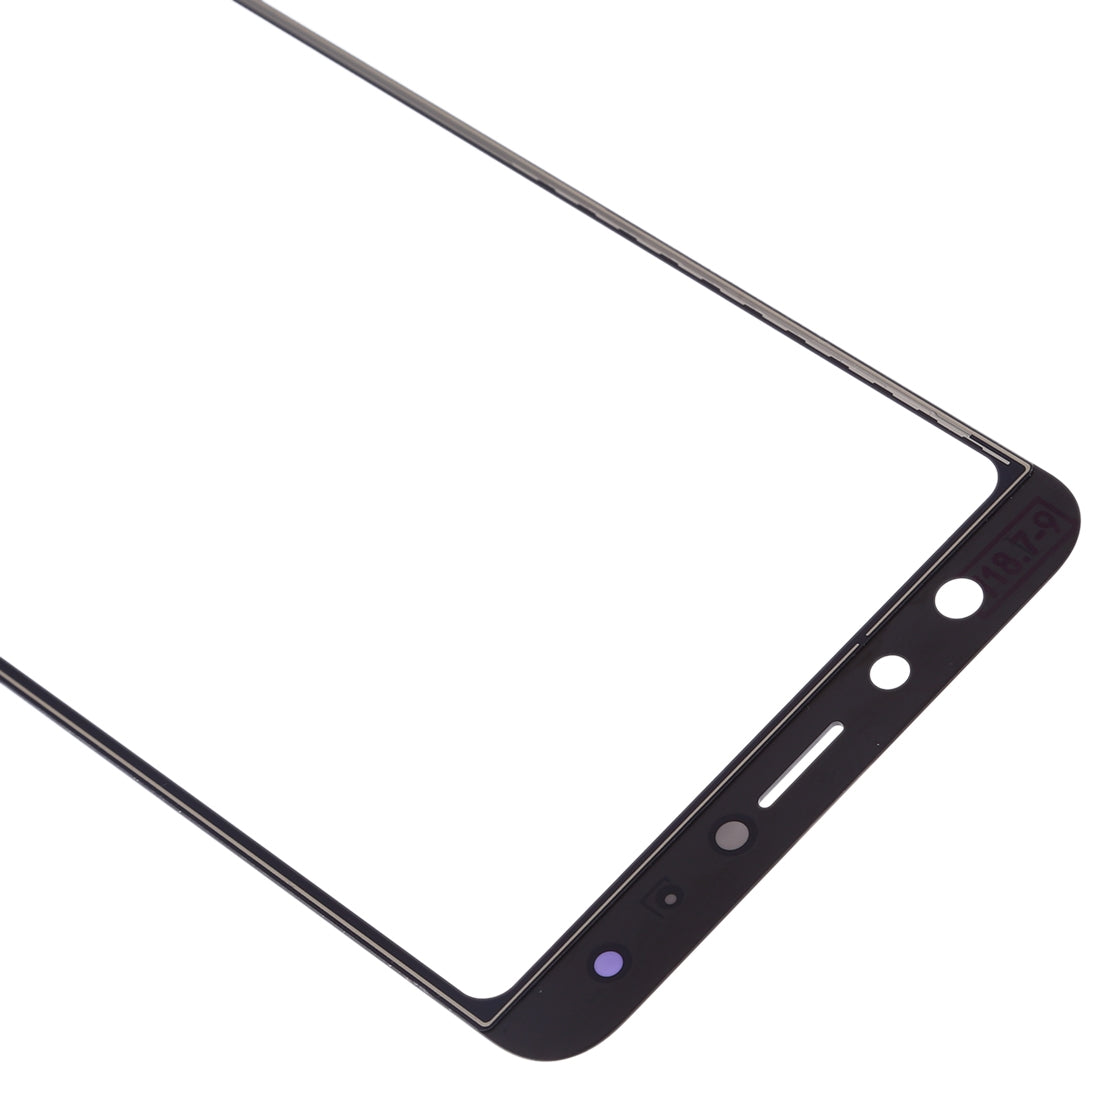 Touch Screen Digitizer Wiko View Prime Black